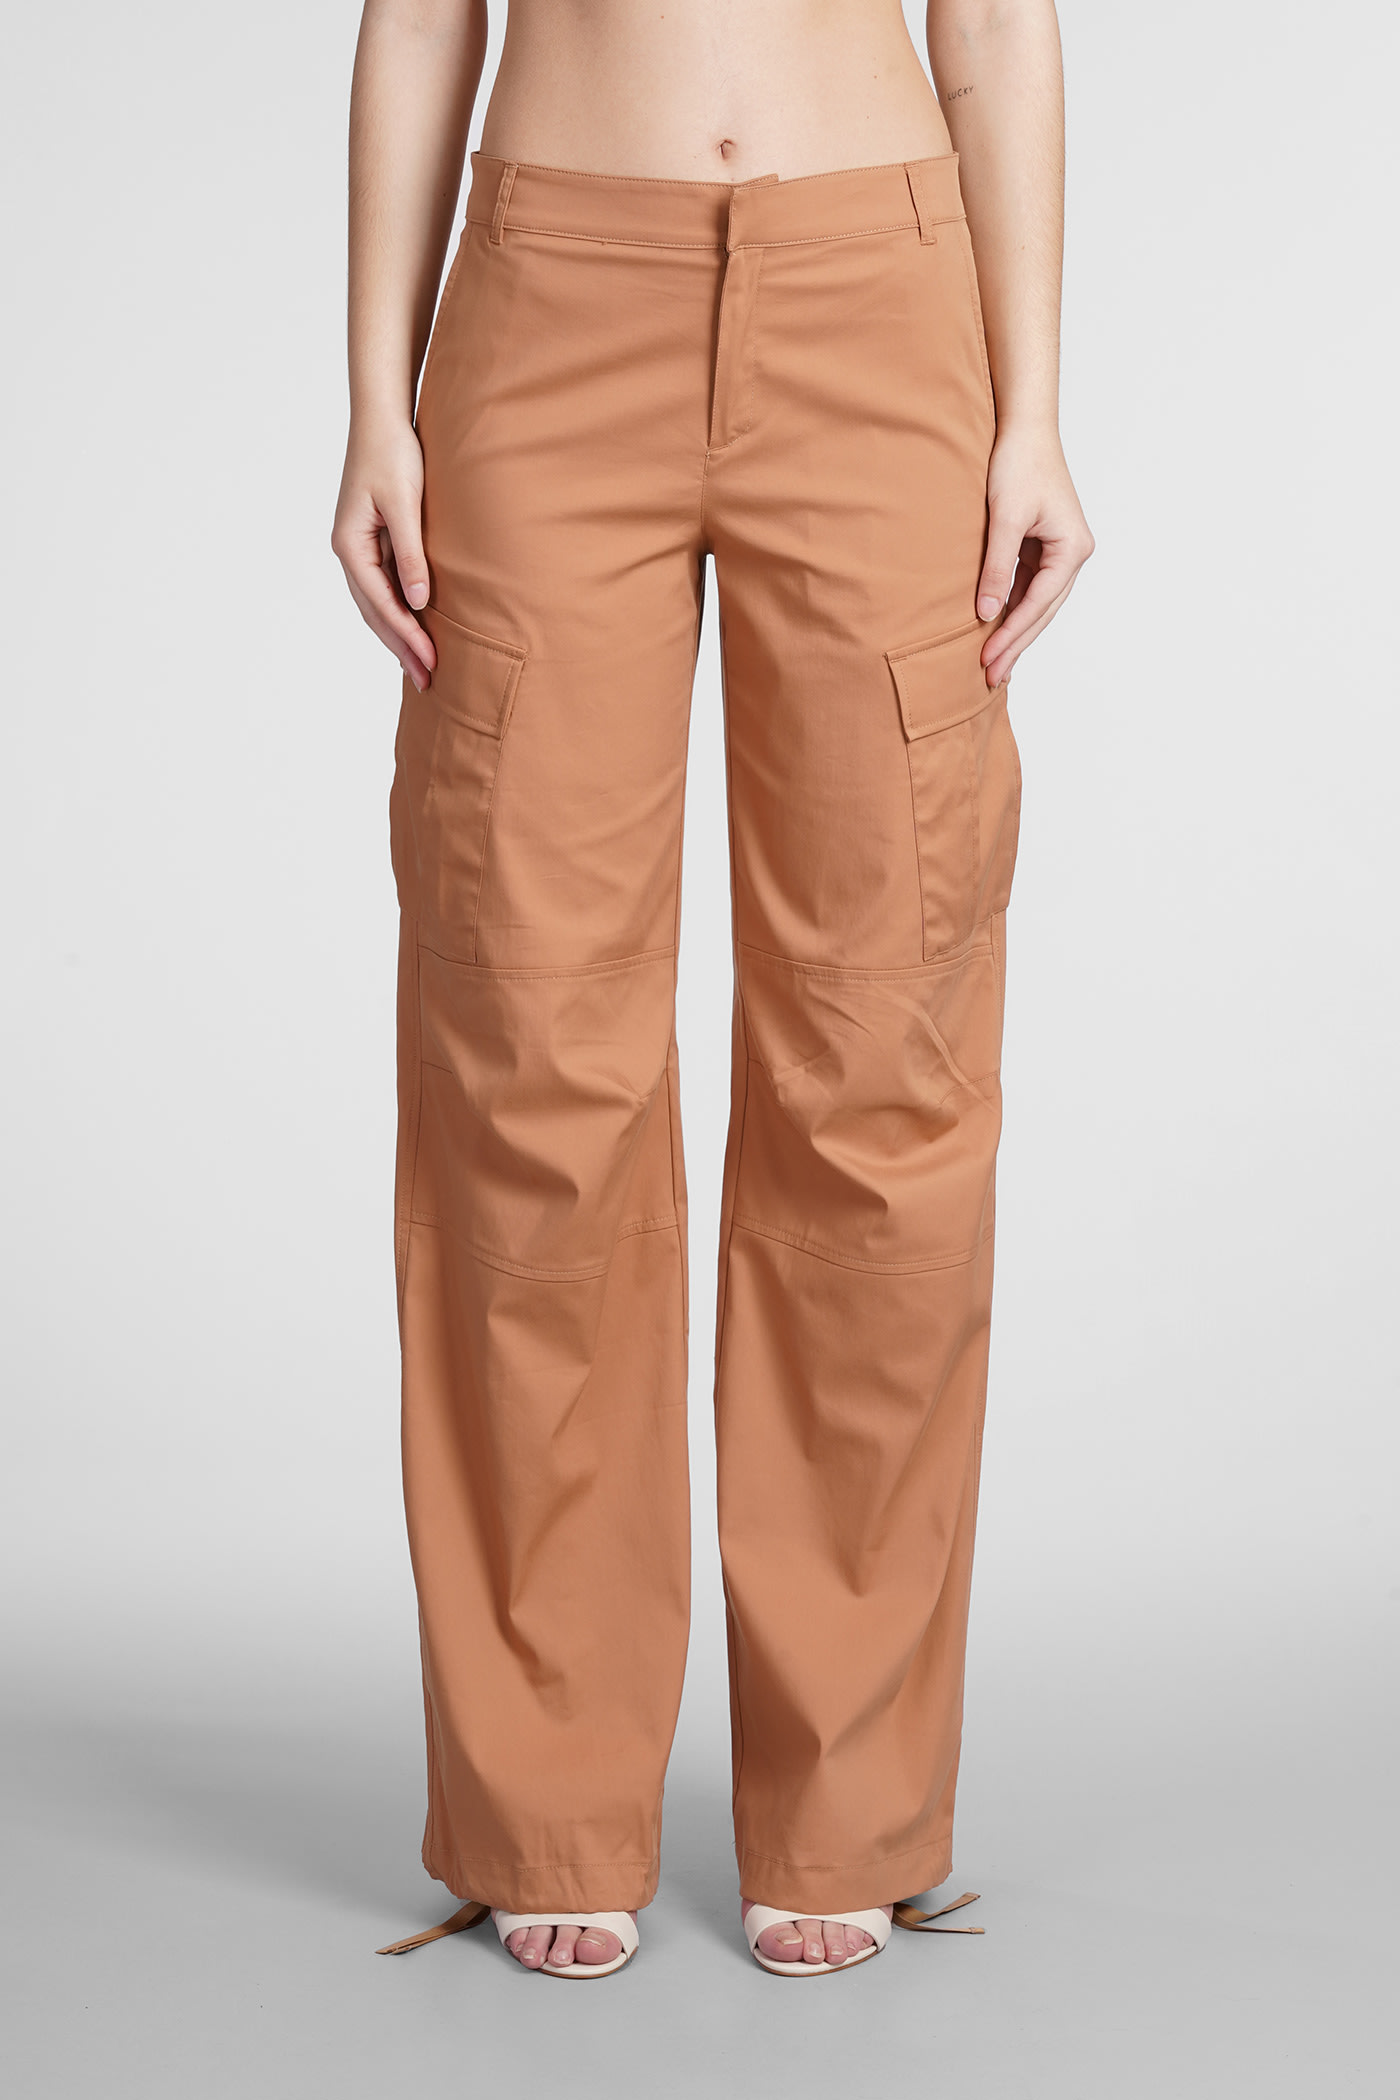 THE ANDAMANE LIZZO PANTS IN CAMEL COTTON